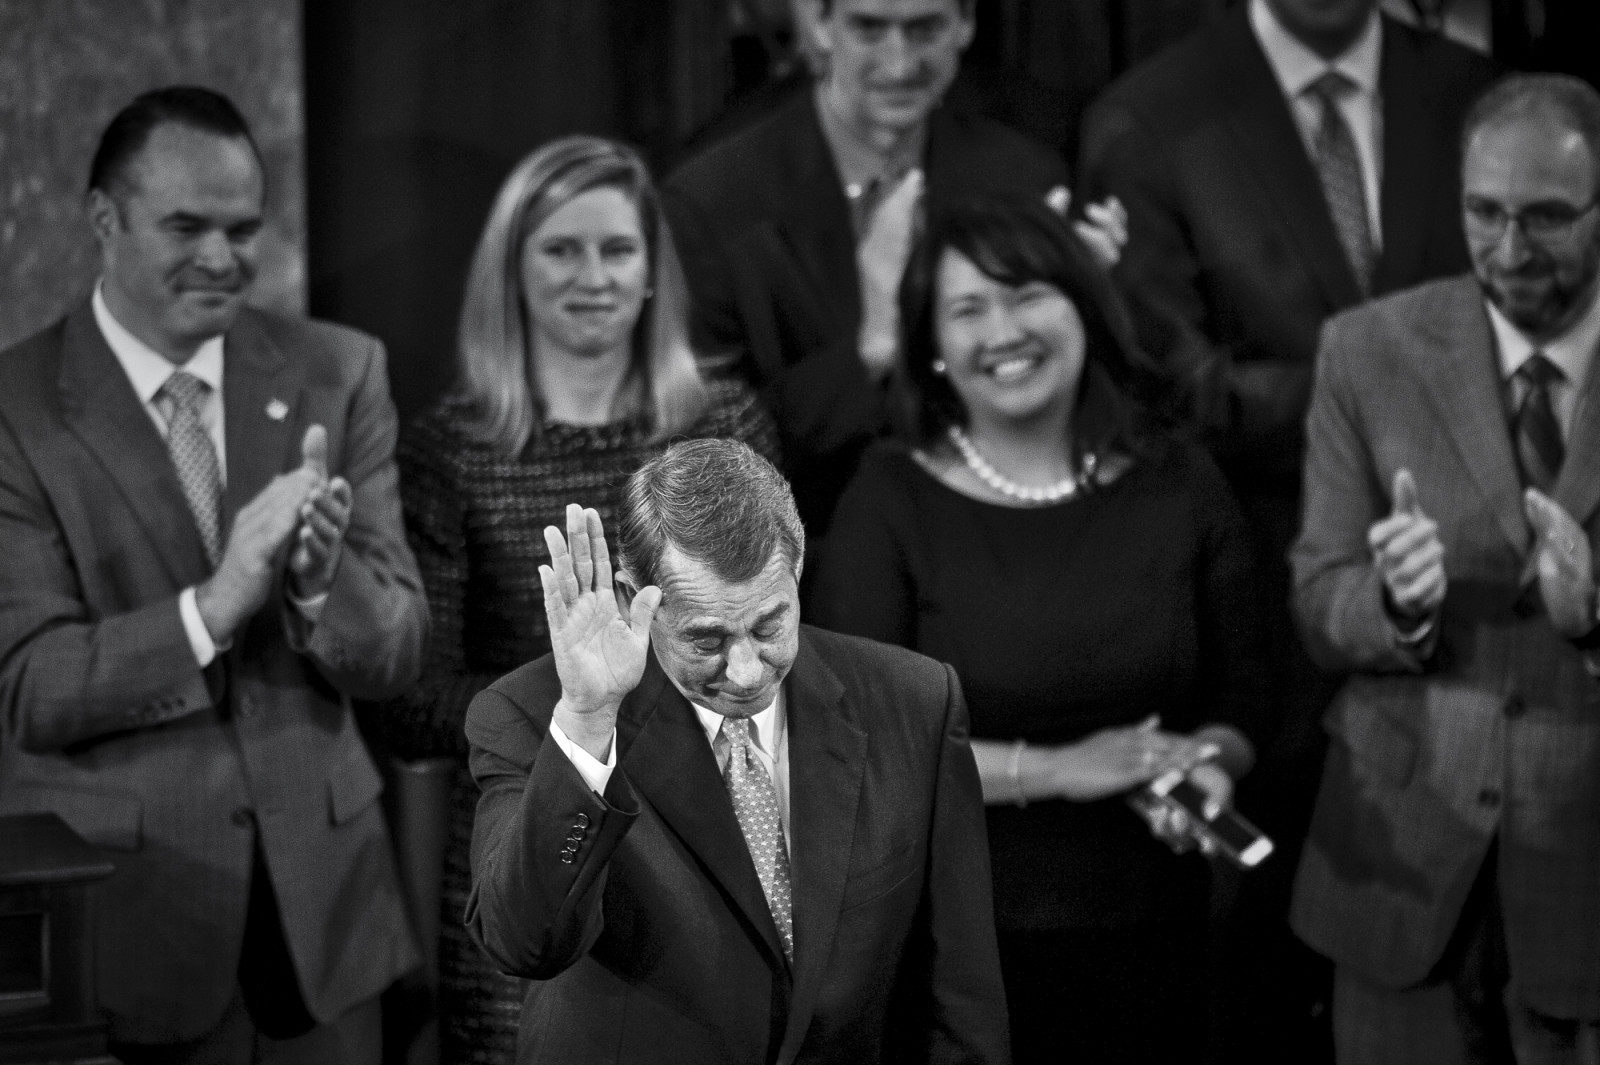 Speaker of the House John Boehner (R-OH) salutes the Chamber after delivering his farewell address to the House of Representatives on October 29, 2015 in Washington, D.C. Following his address, the House of Representatives will vote on Boehner’s replacement for Speaker. Photo by Pete Marovich/UPI